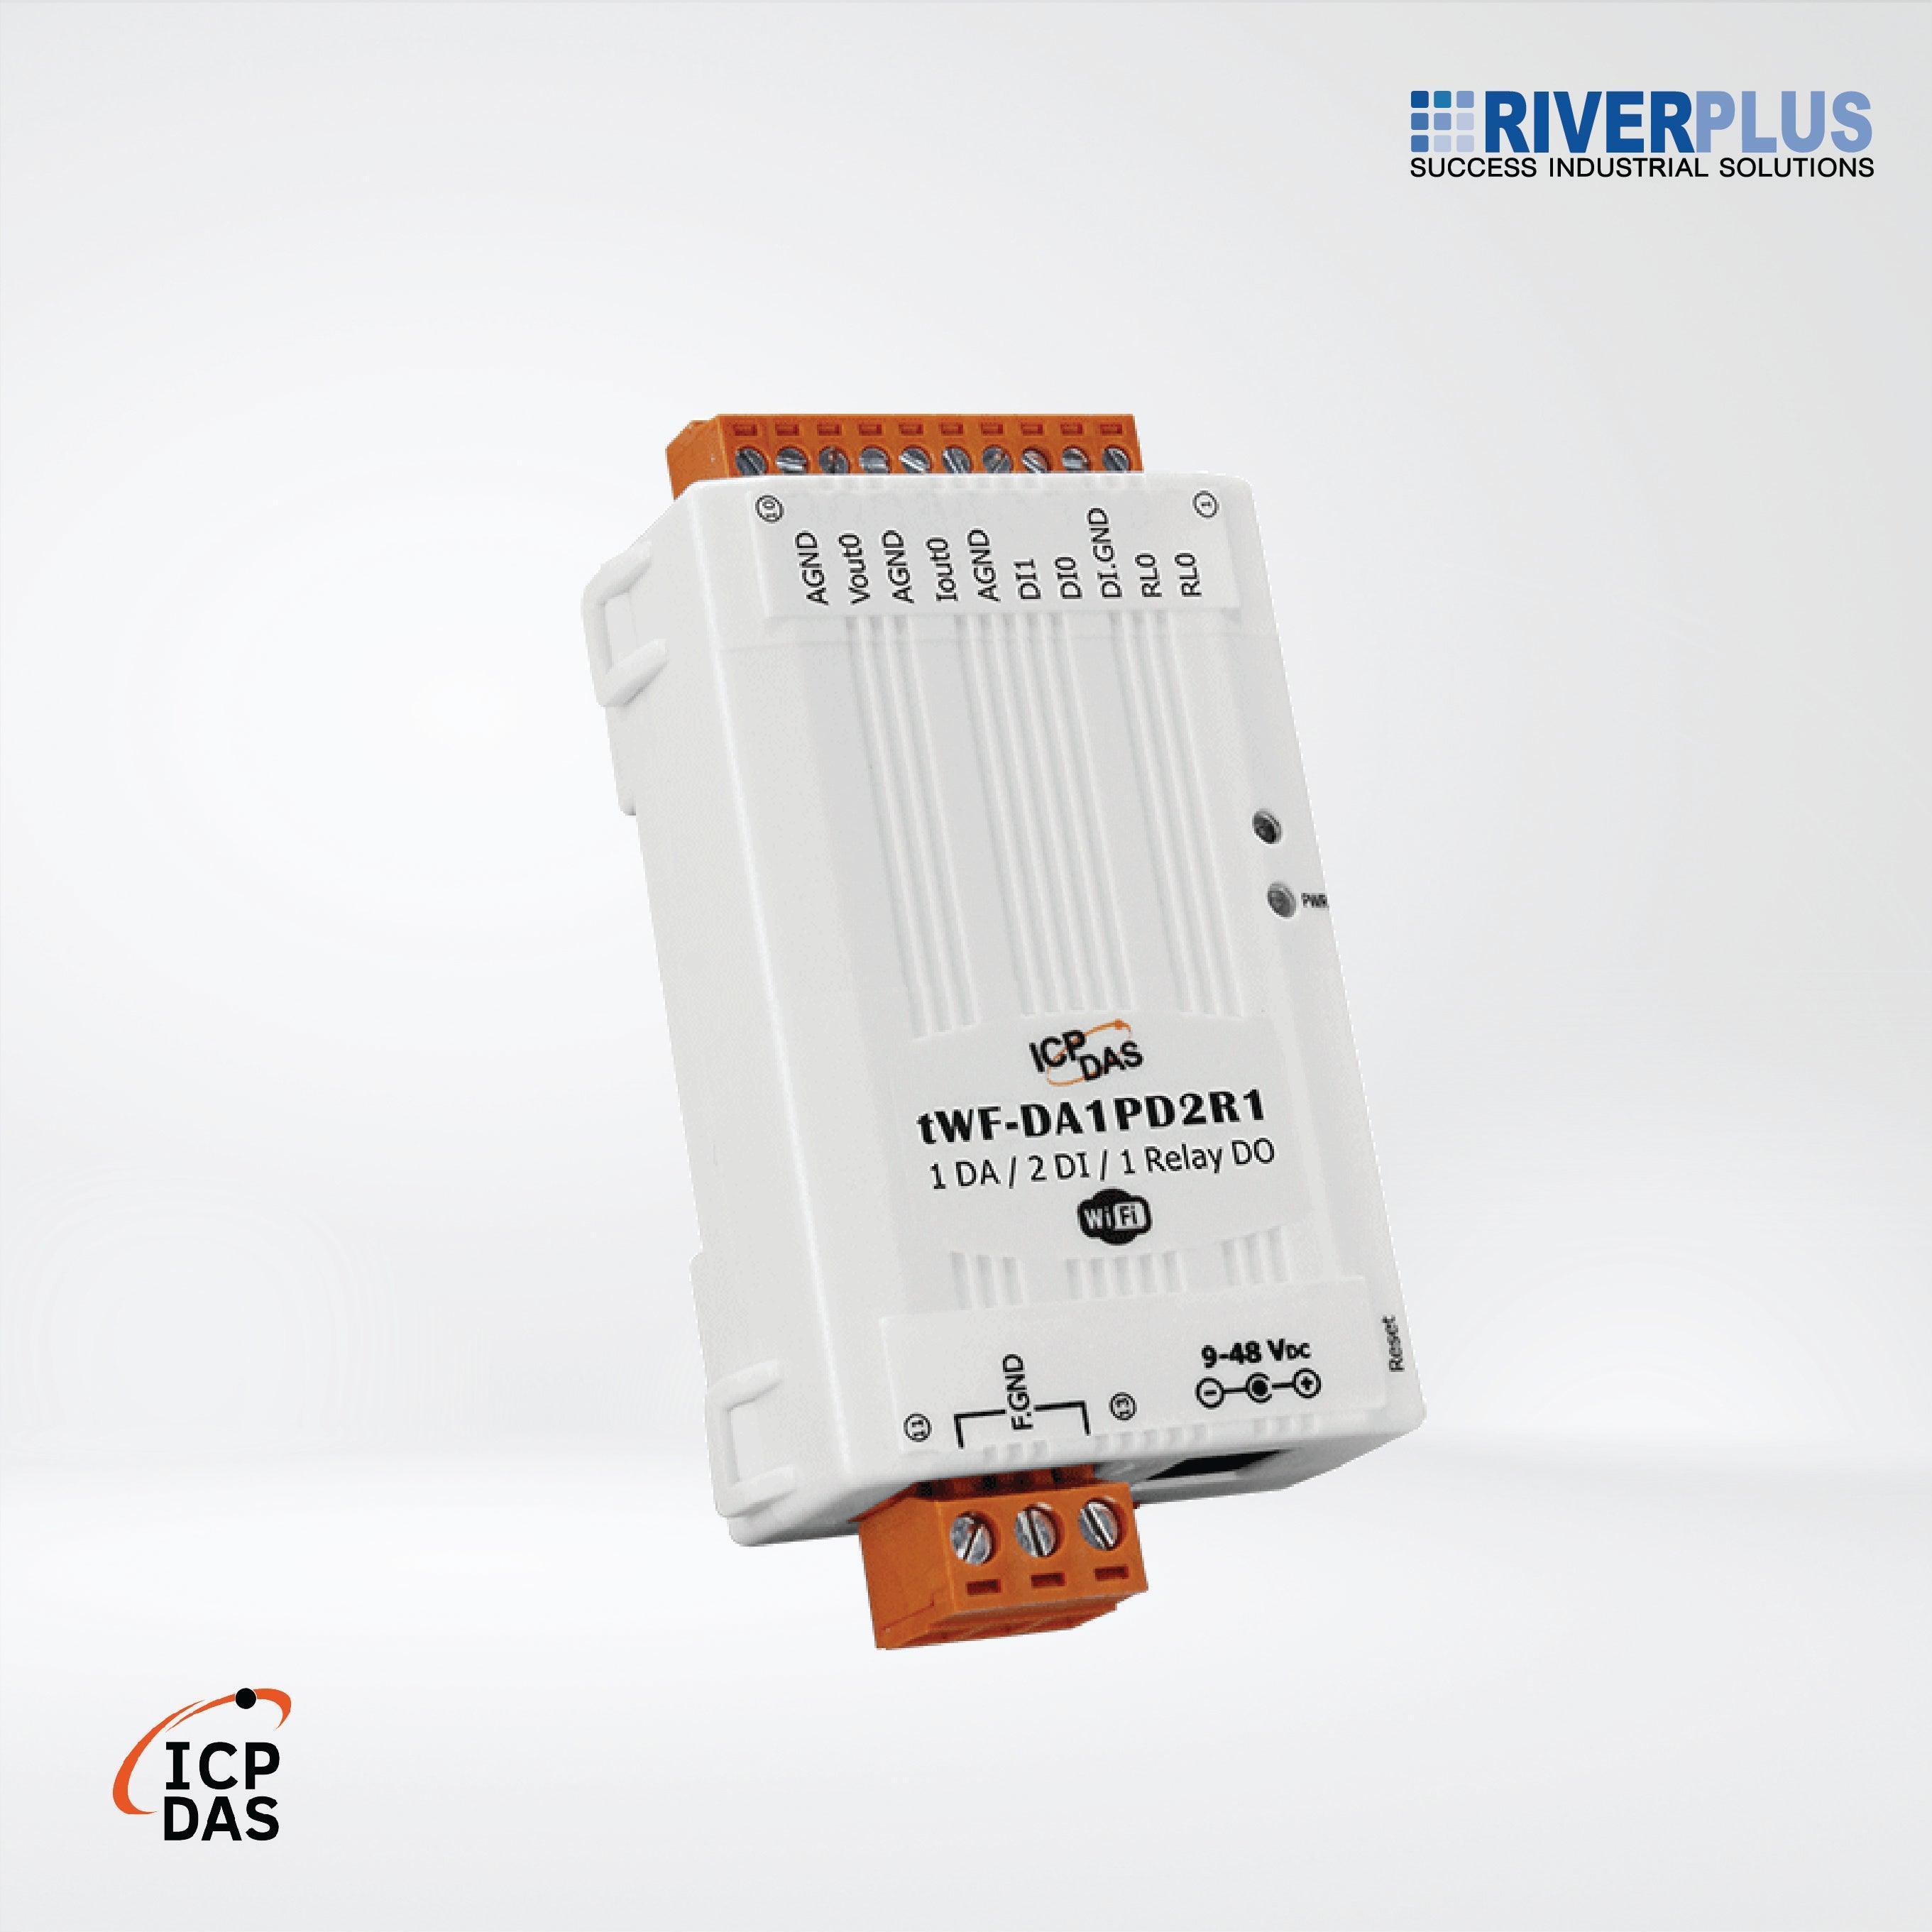 tWF-DA1PD2R1 Tiny Wi-Fi I/O Module with 1-ch AO, 2-ch DI and 1-ch Power Relay (Asia Only) - Riverplus